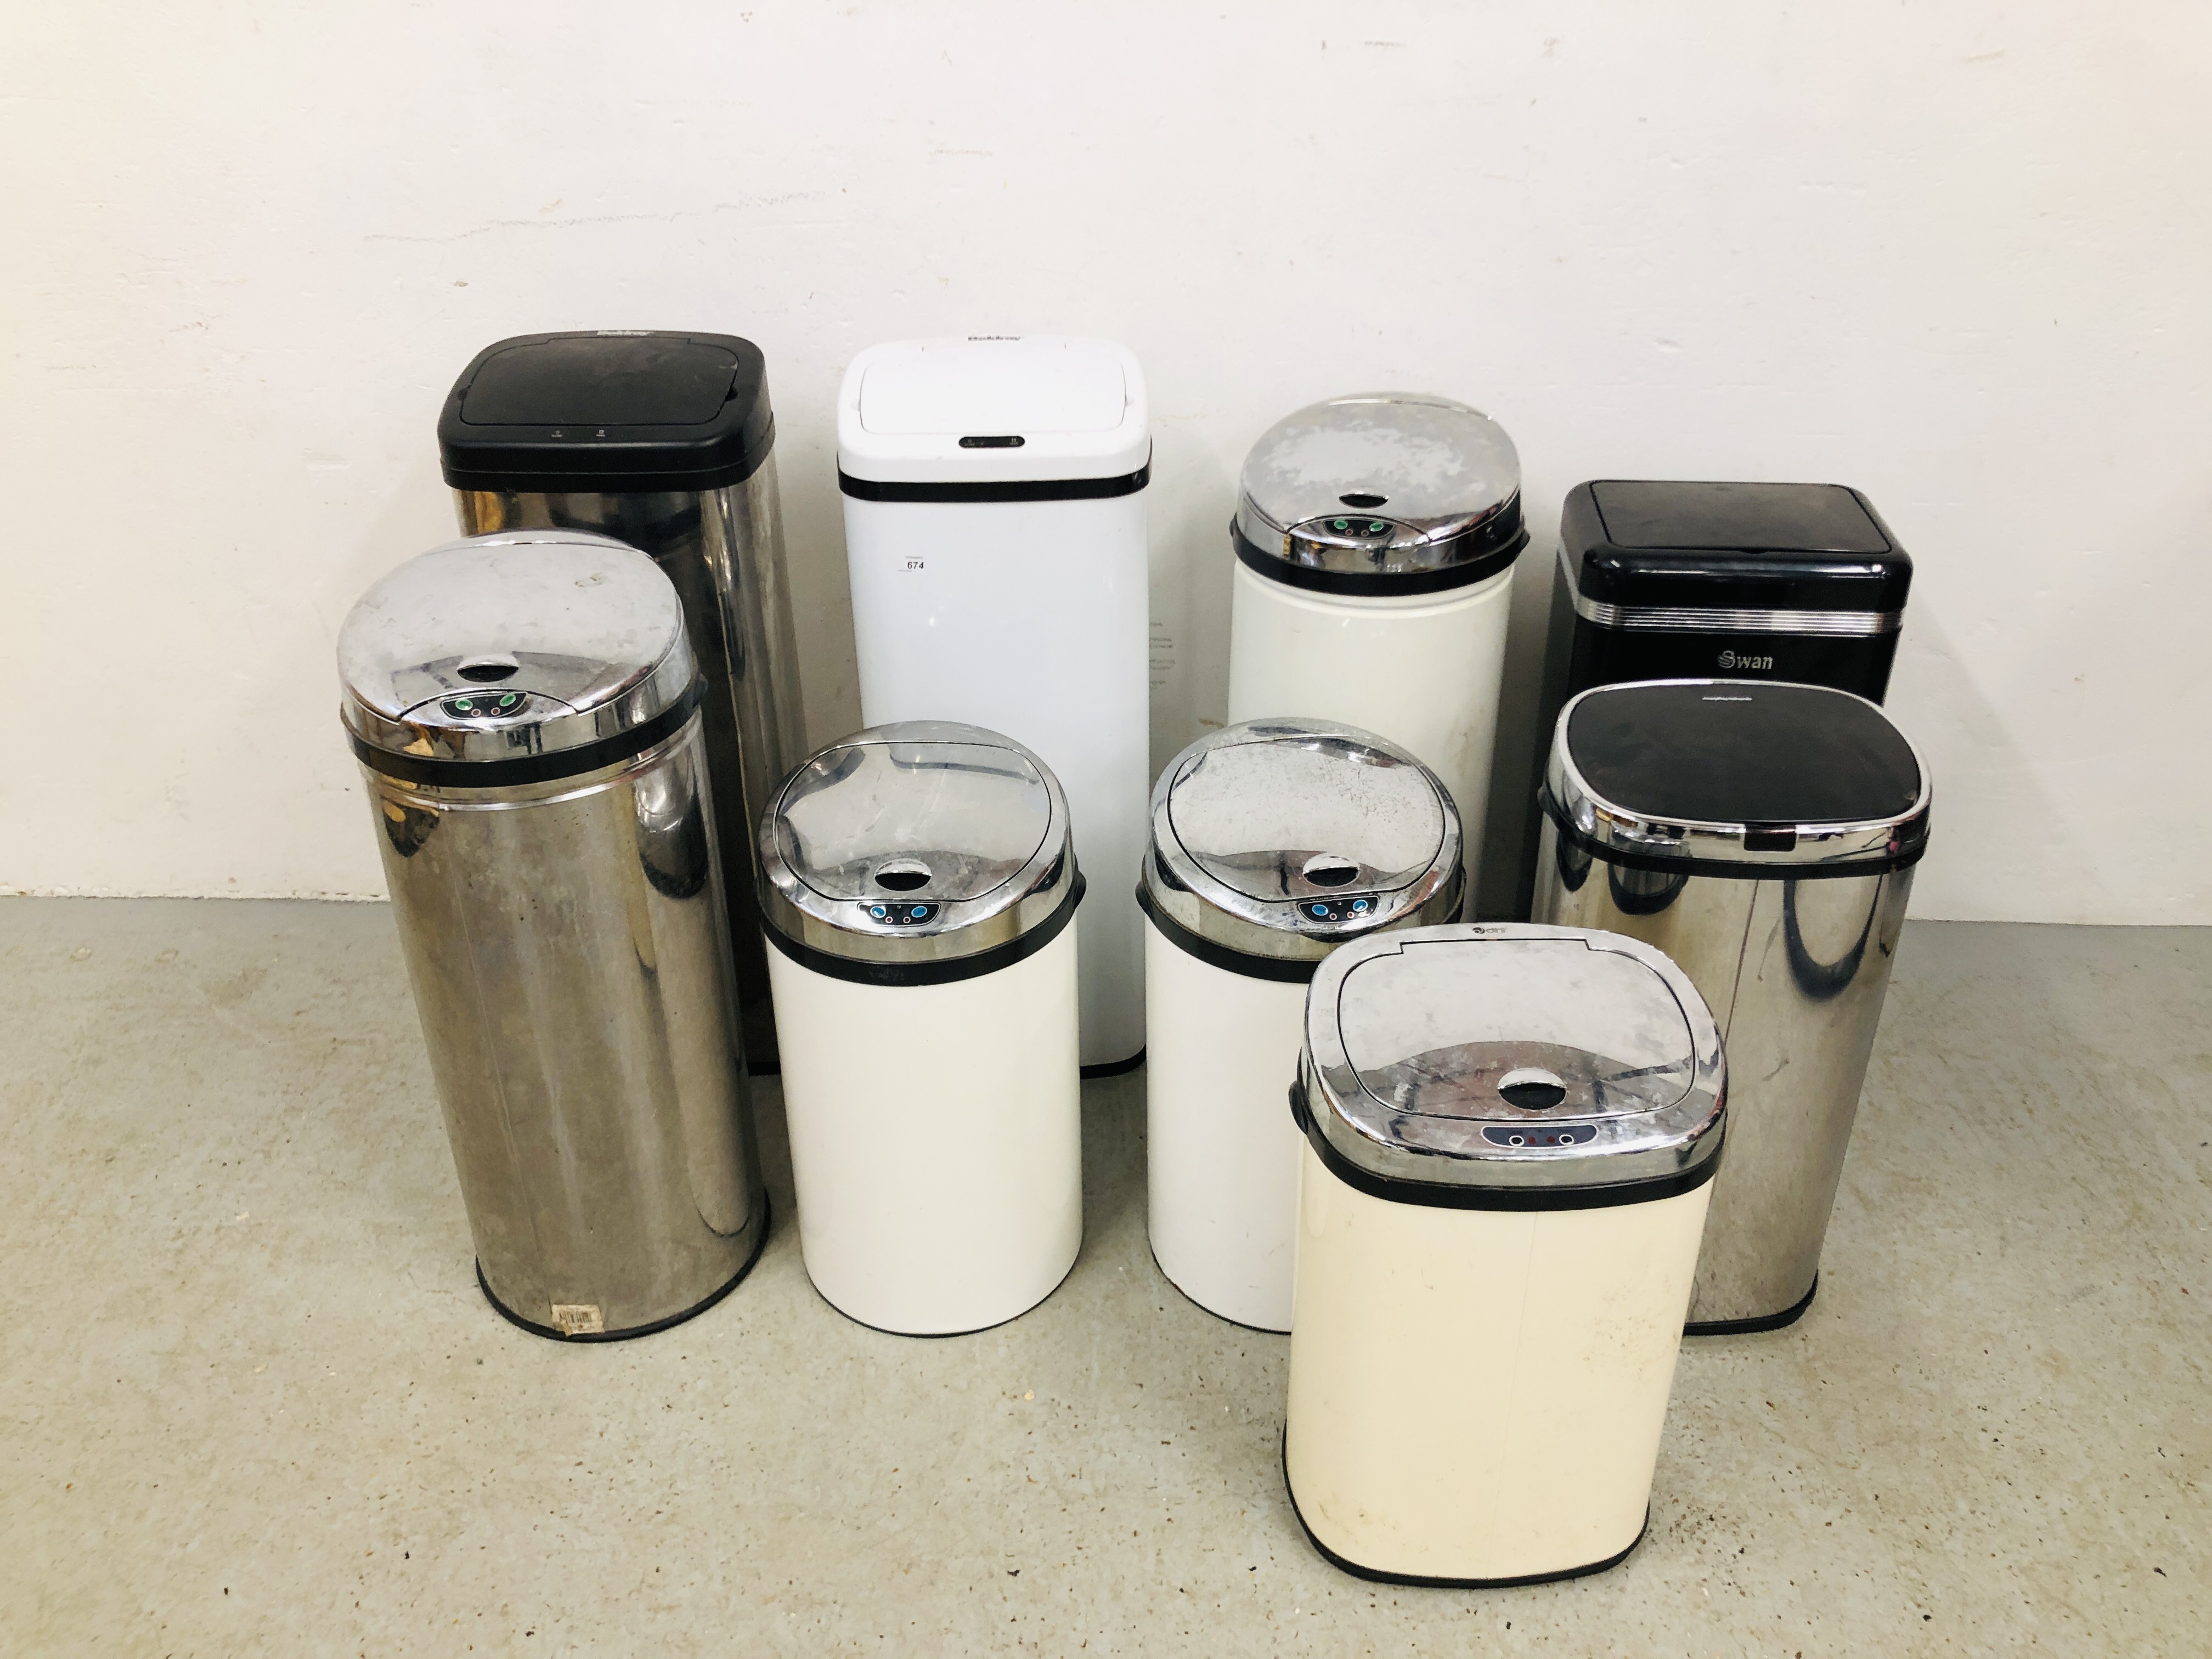 NINE VARIOUS WASTE BINS WITH ELECTRIC OPENING LIDS